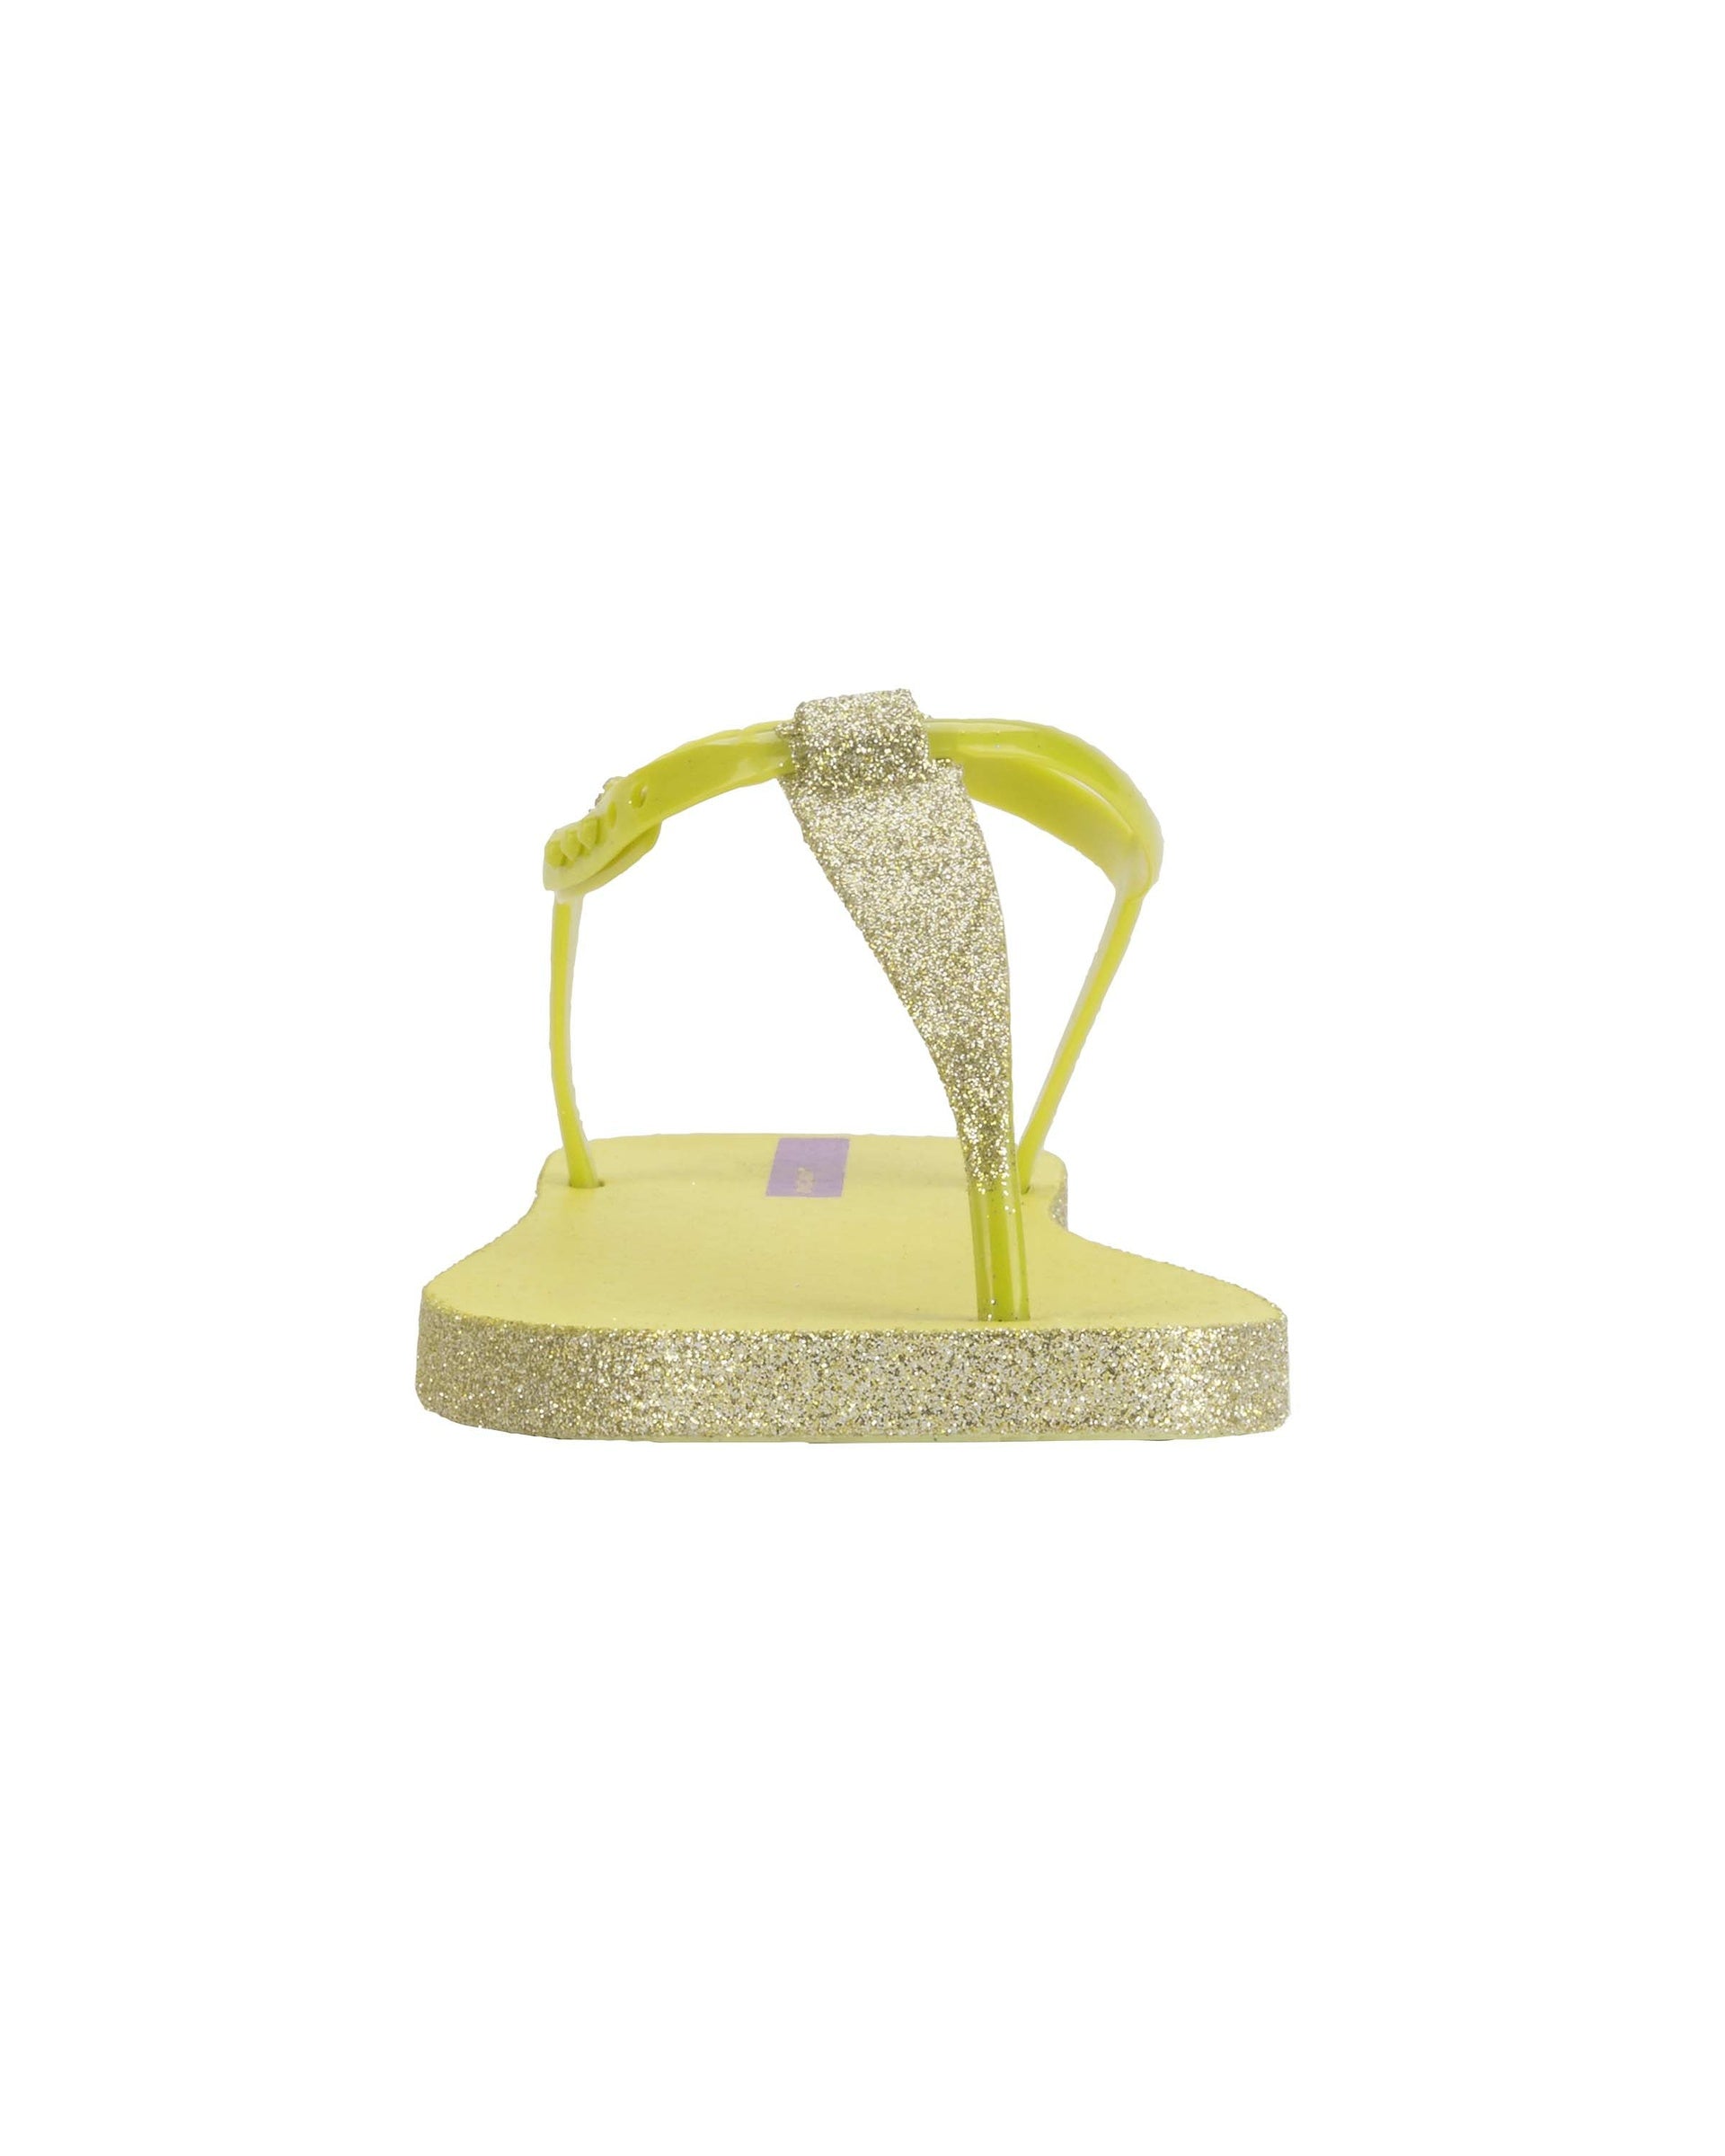 Front view of a green Ipanema Class Edge Glow t-strap women's sandal with glitter green thong.